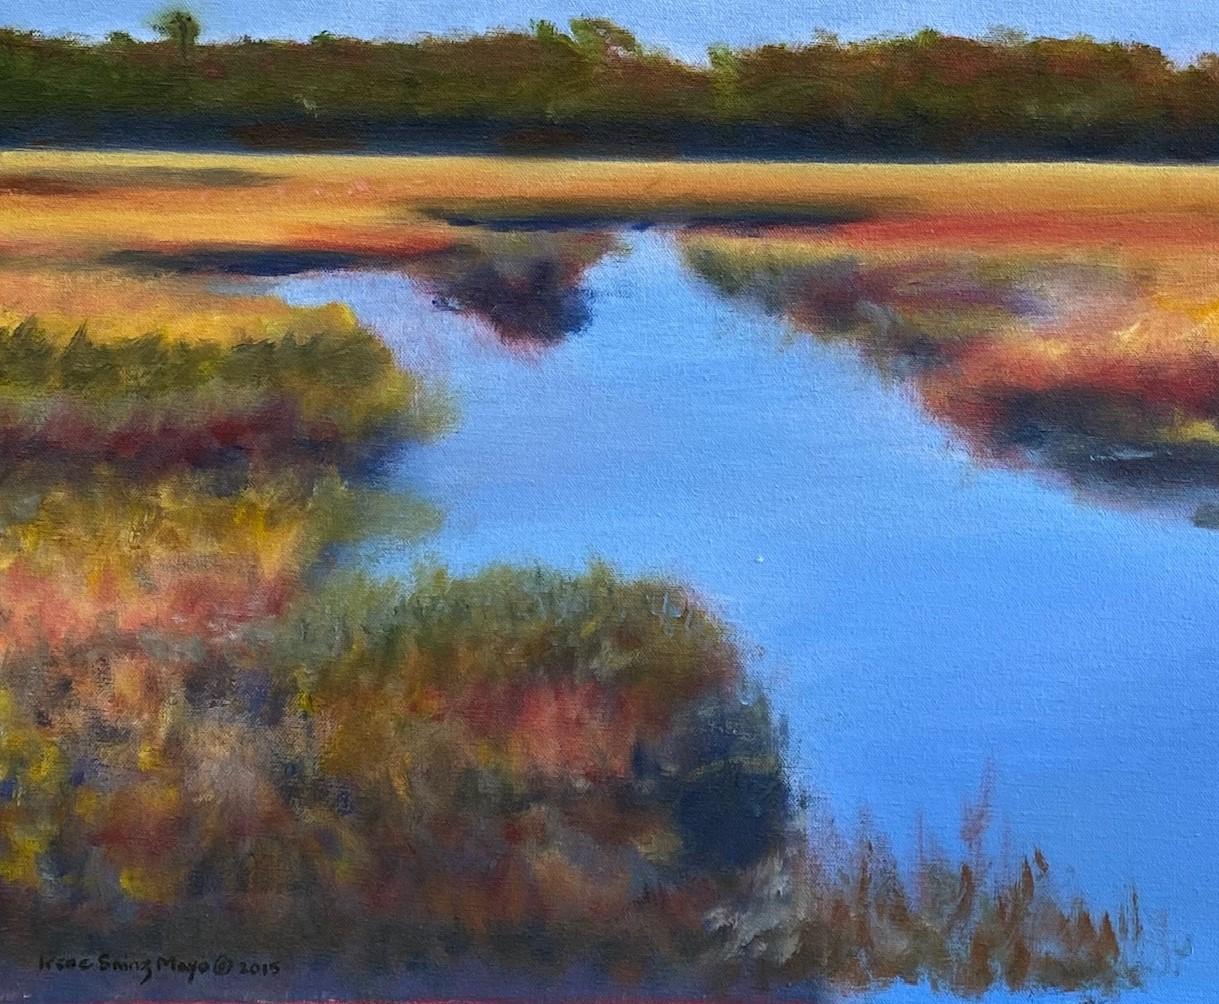 The cool blue sky and waters in the creek at high tide is memorialized in this contemporary expressionist marine landscape by leading Savannah, Georgia artist Irene S. Mayo.  Inspired by her environs along the southeastern United States coastline